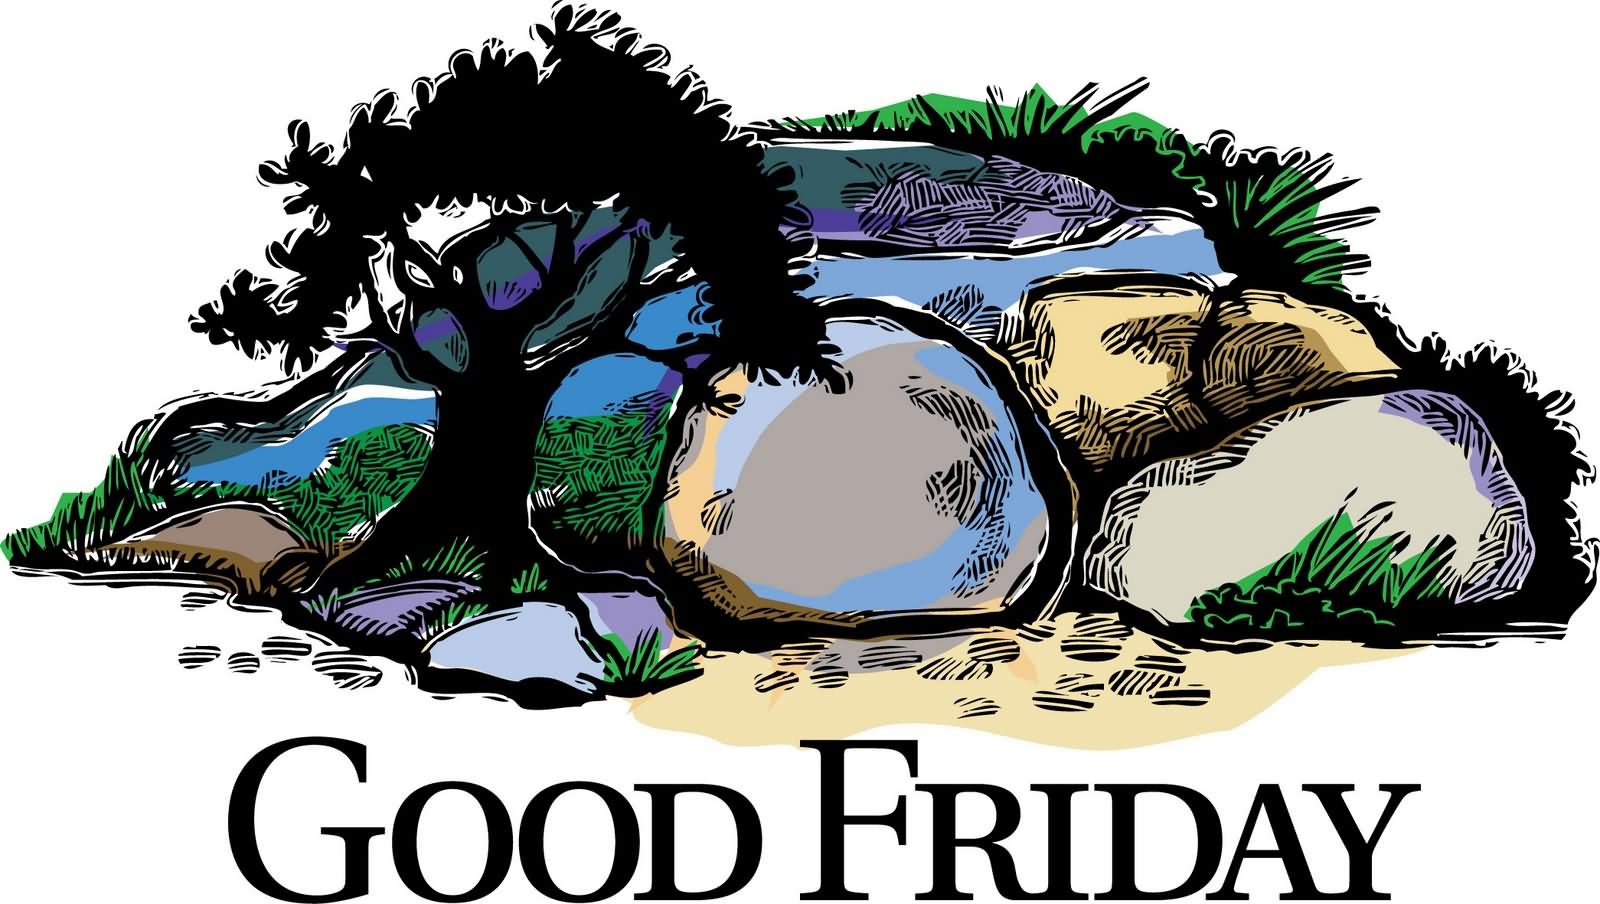 20 Very Beautiful Good Friday Clipart Pictures.